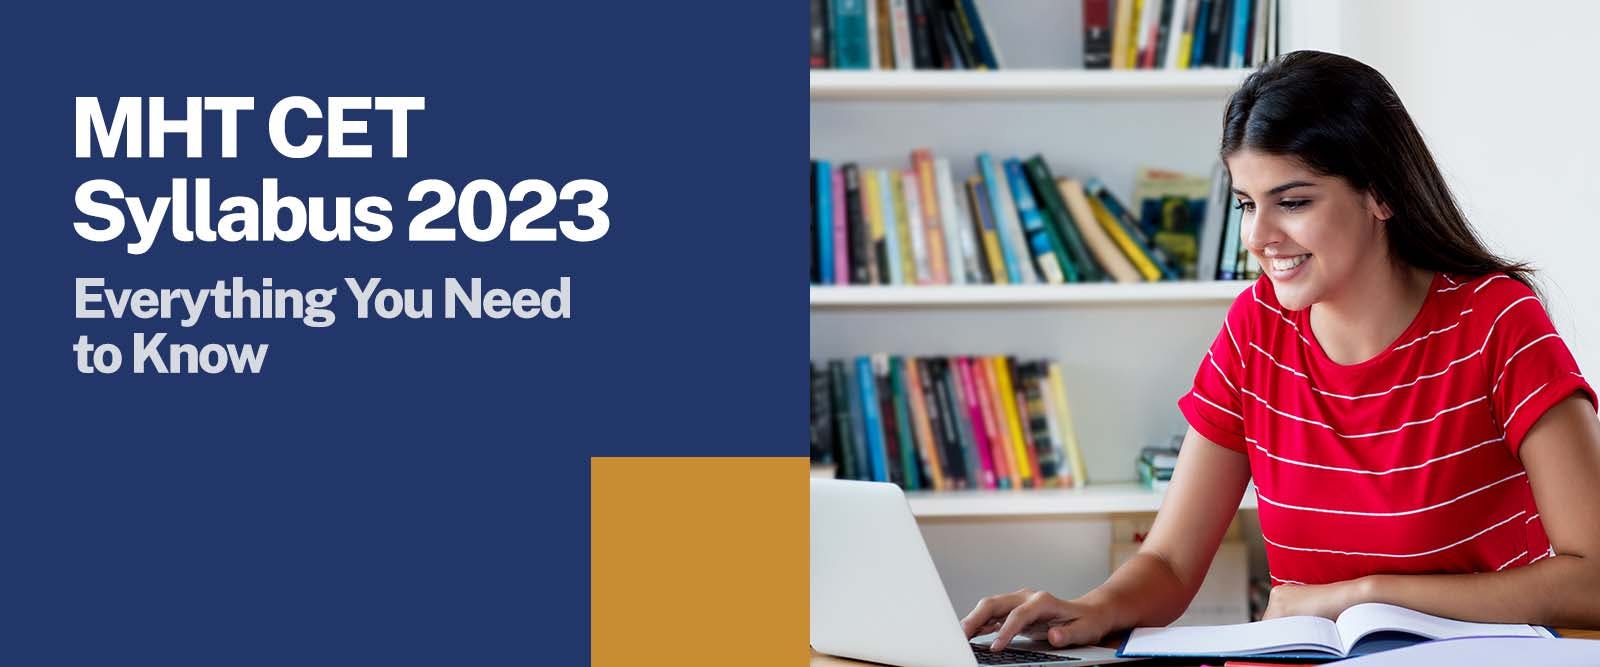 MHT CET Syllabus 2023 - Everything You Need to Know